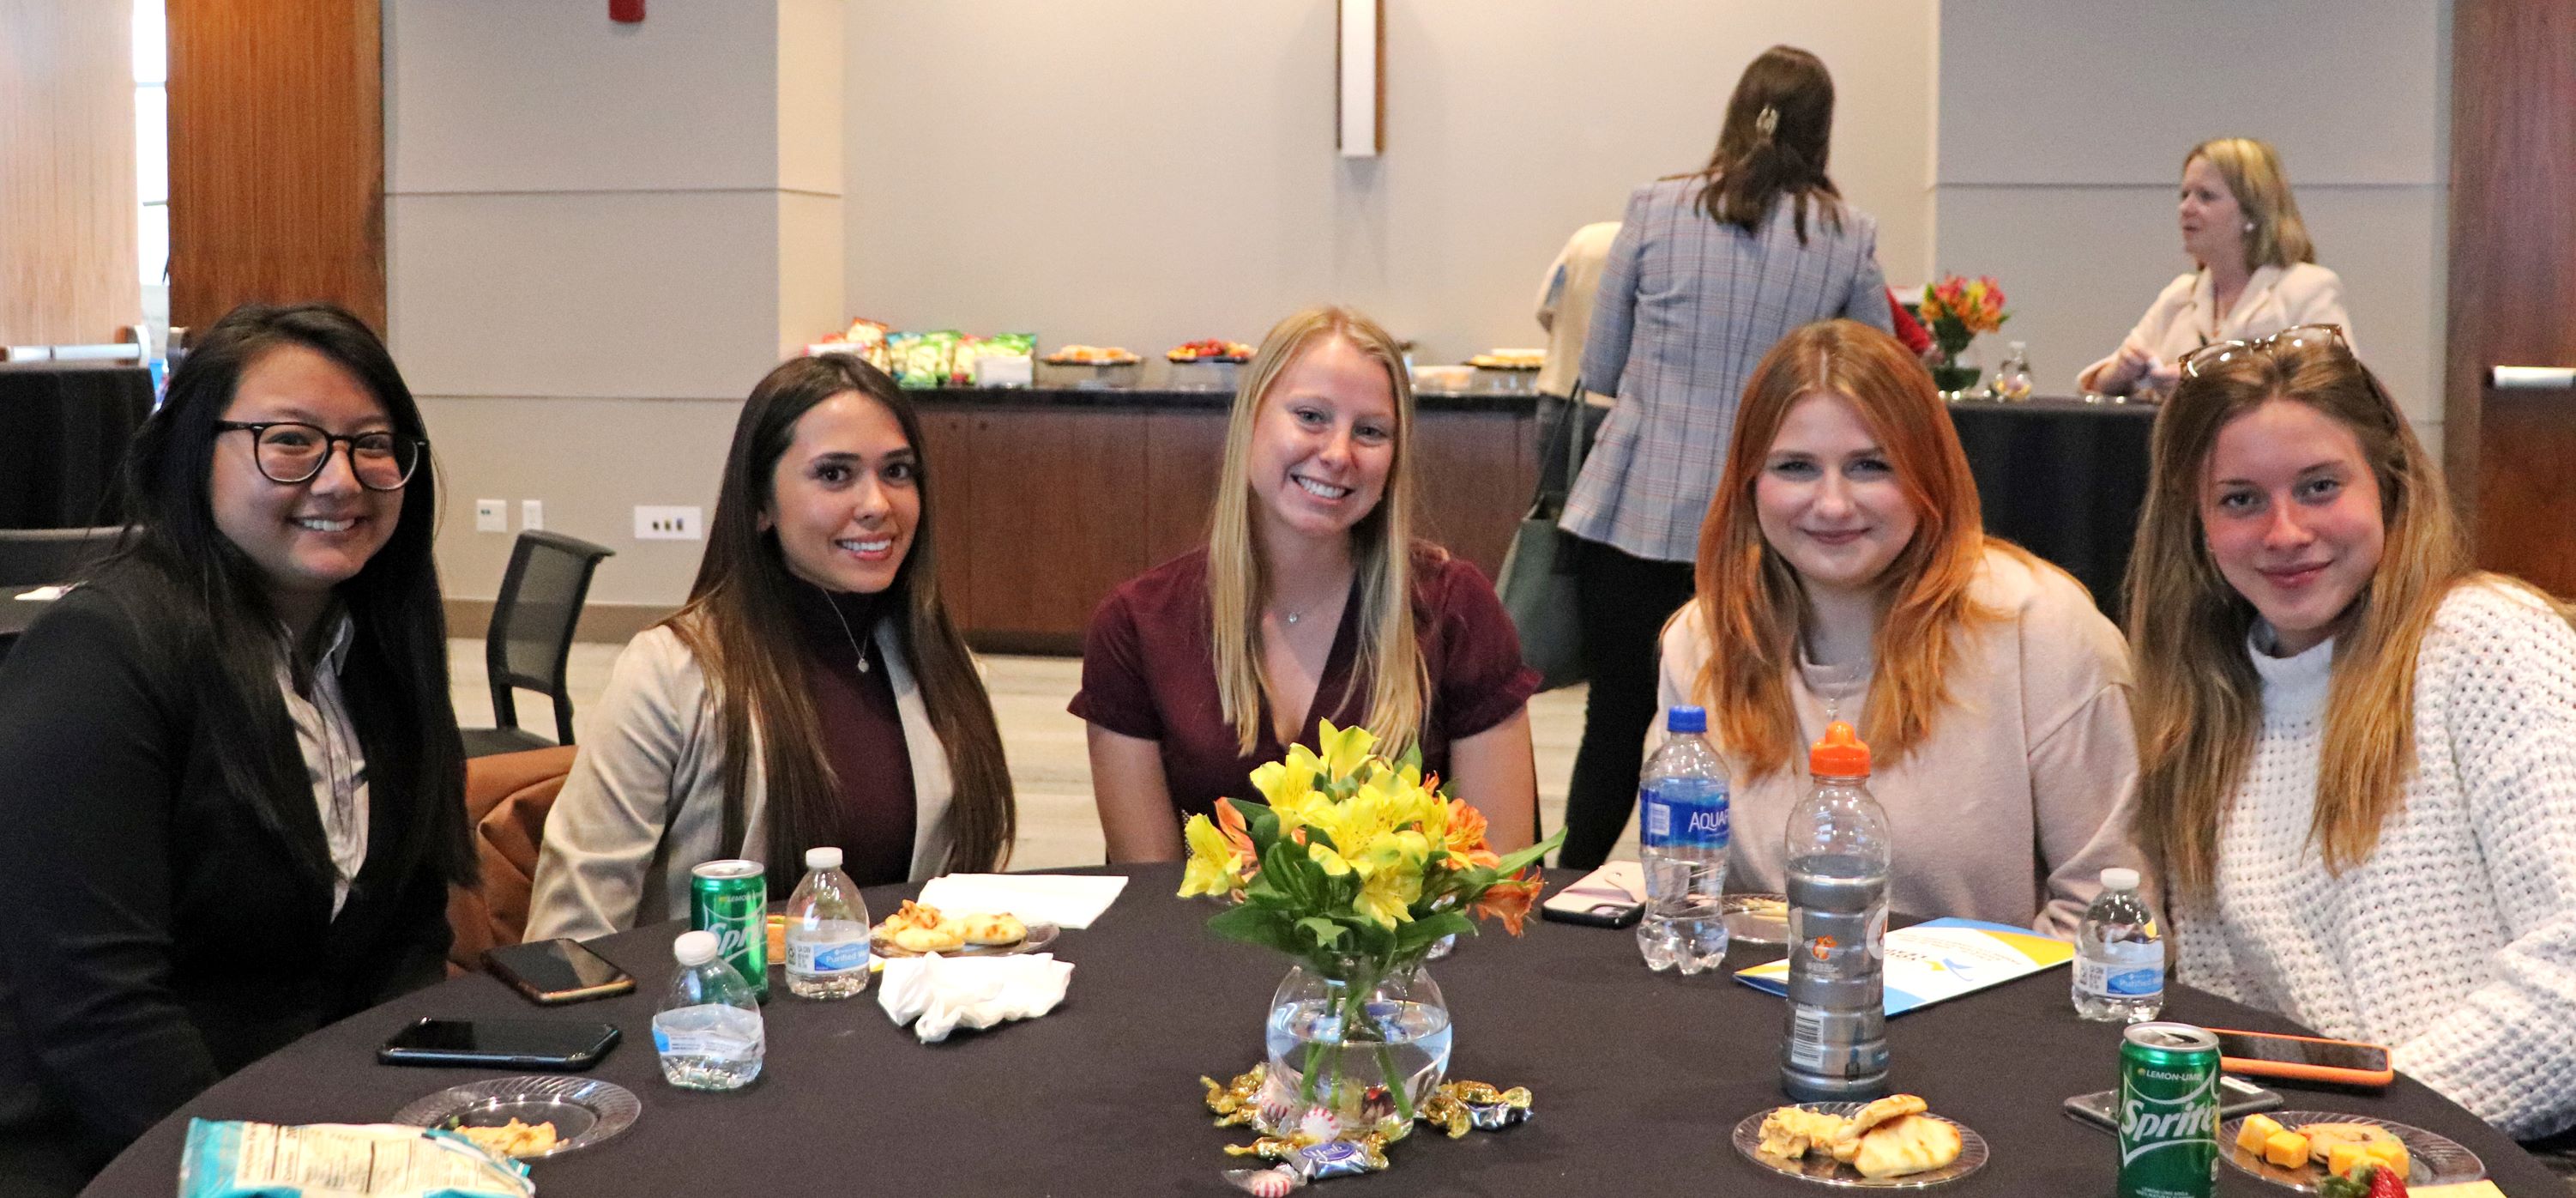 Several students from the 3230 Event Experience class involved with organizing the Young Leaders Expo sit at a table and smile for the camera.